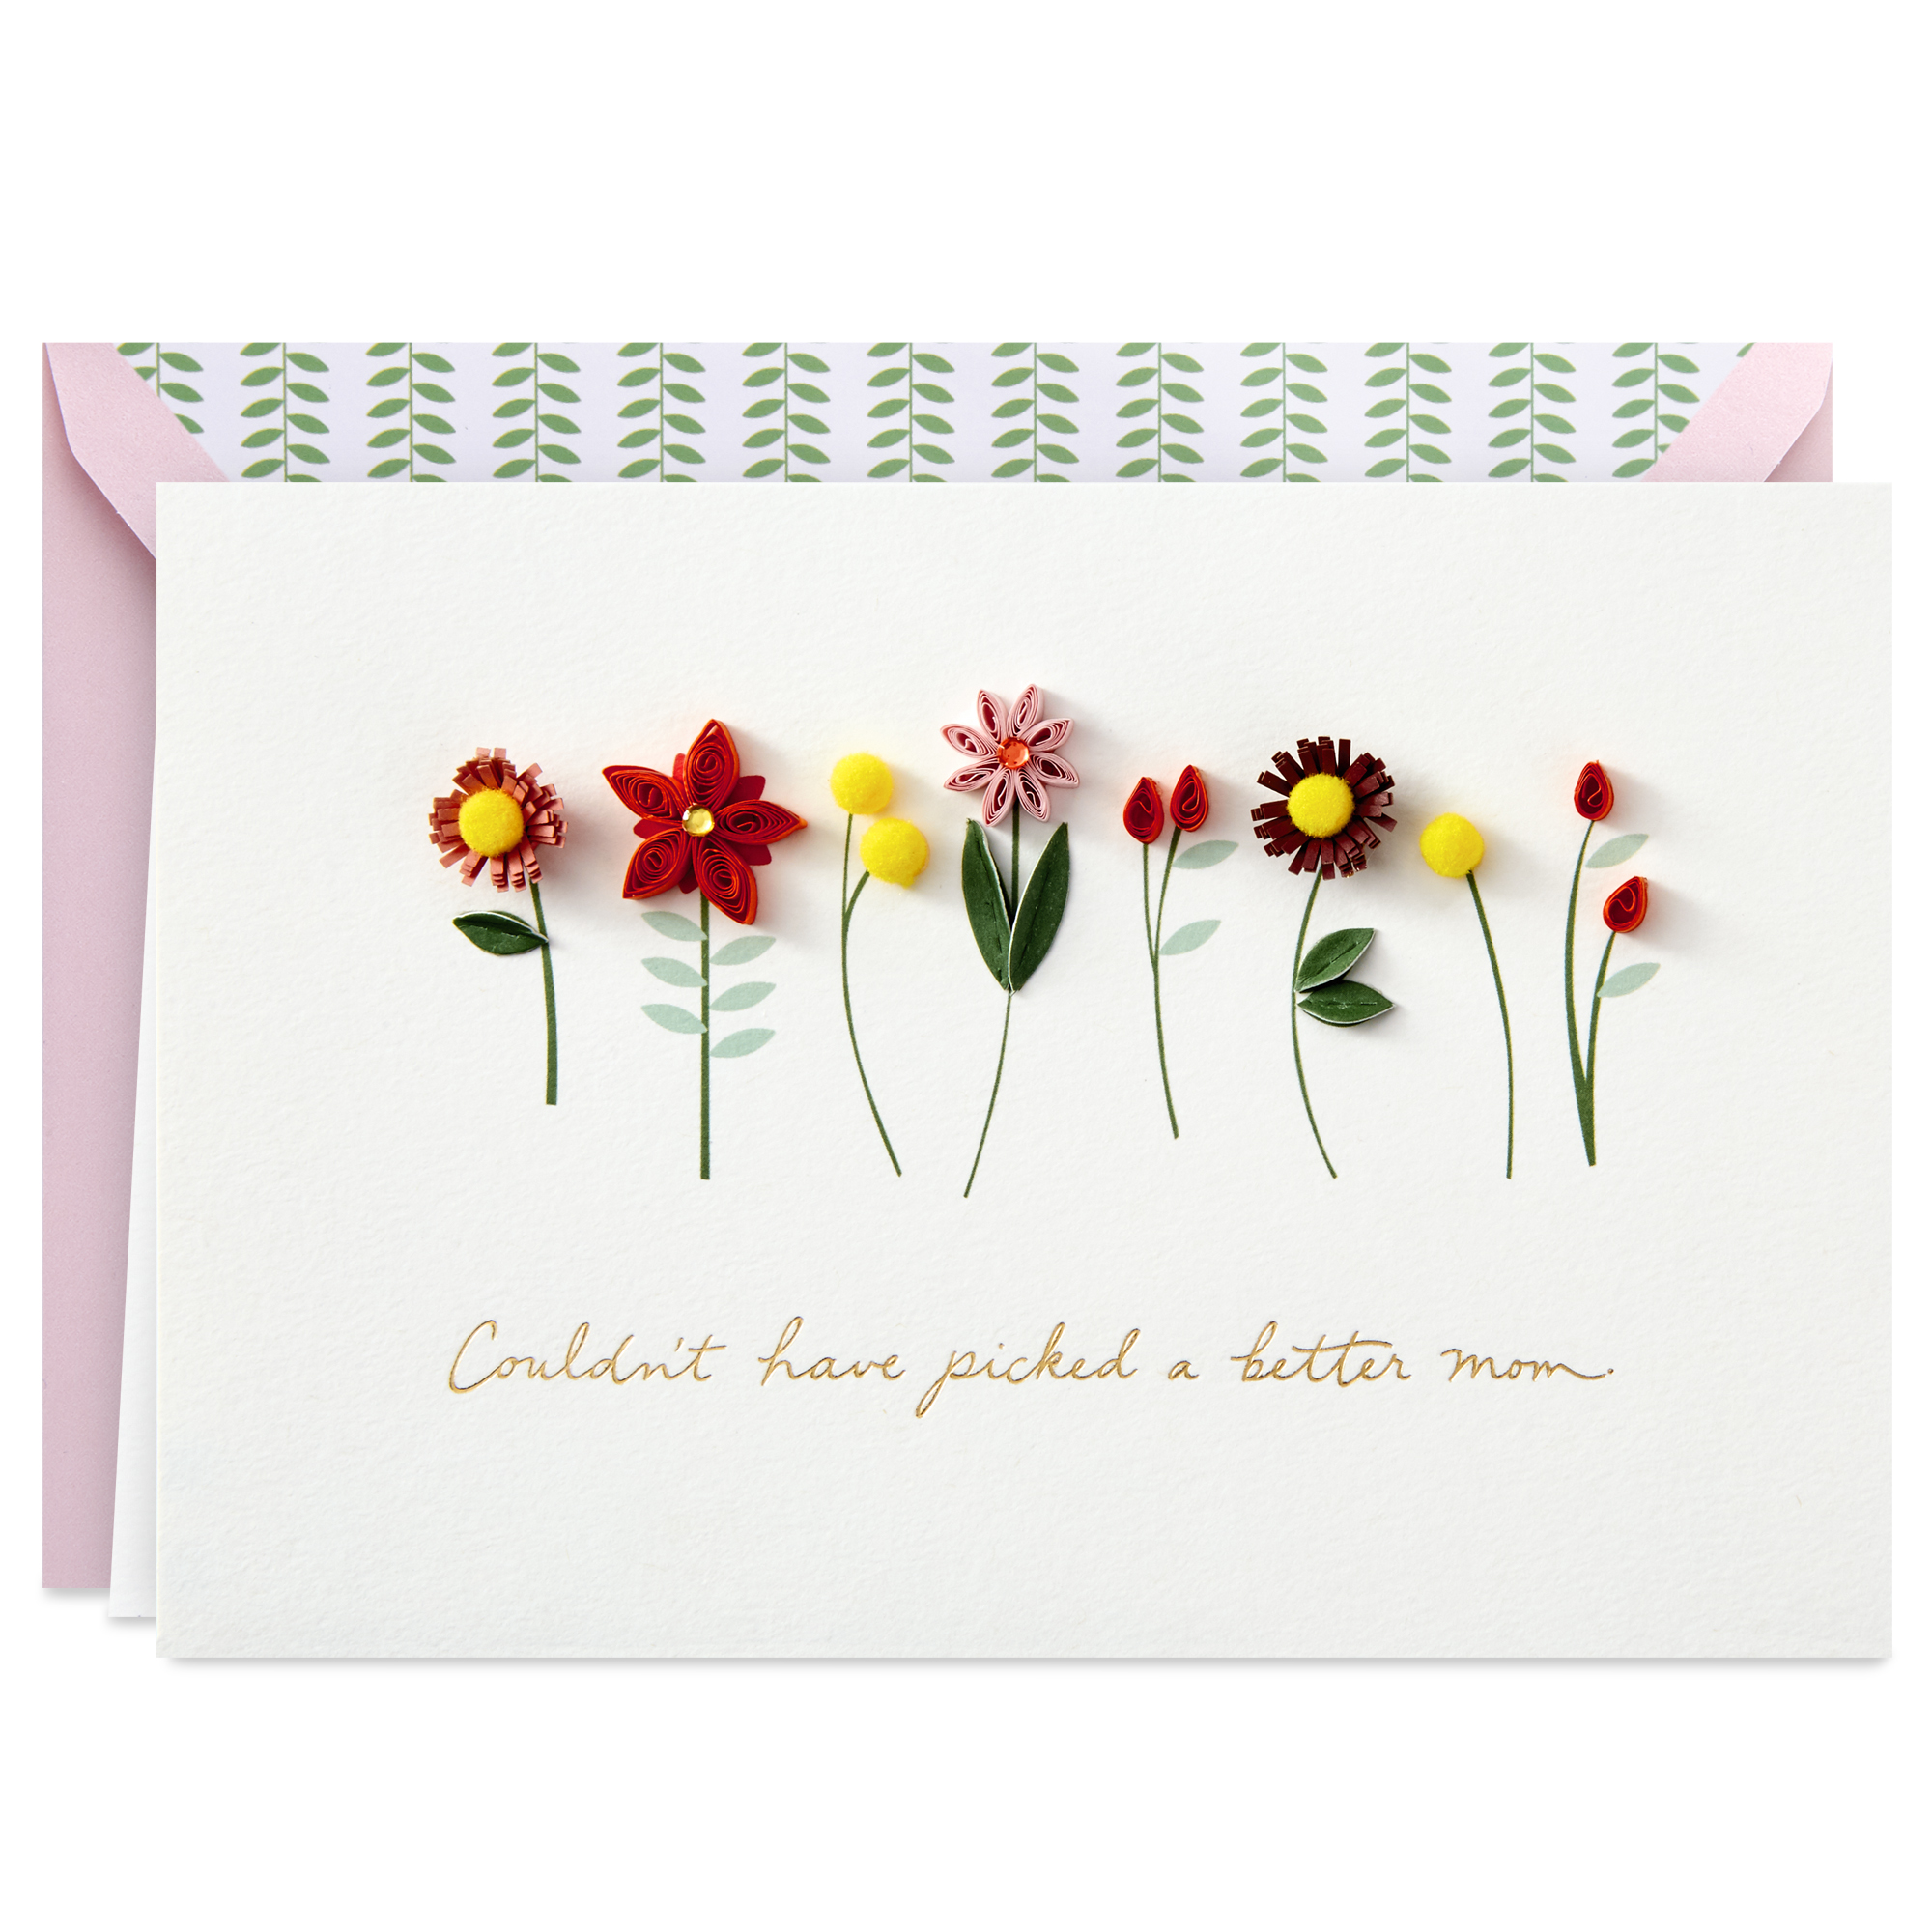 Hallmark Signature Mothers Day Card (Quilled Flowers, Couldn't Have Picked a Better Mom) - image 1 of 6